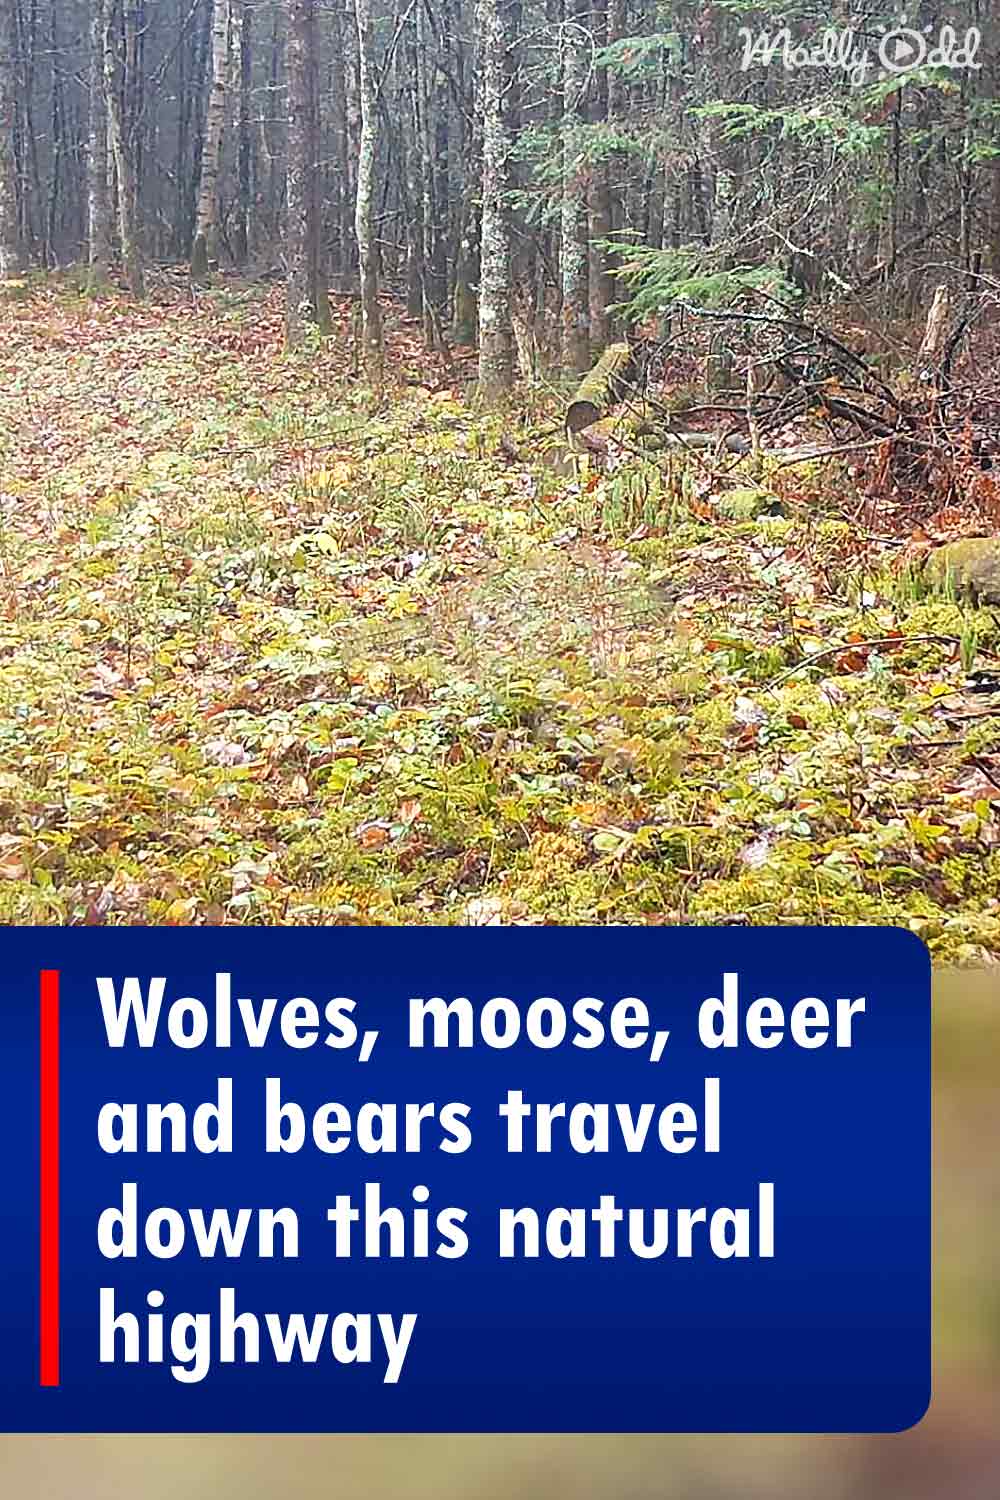 Wolves, moose, deer and bears travel down this natural highway